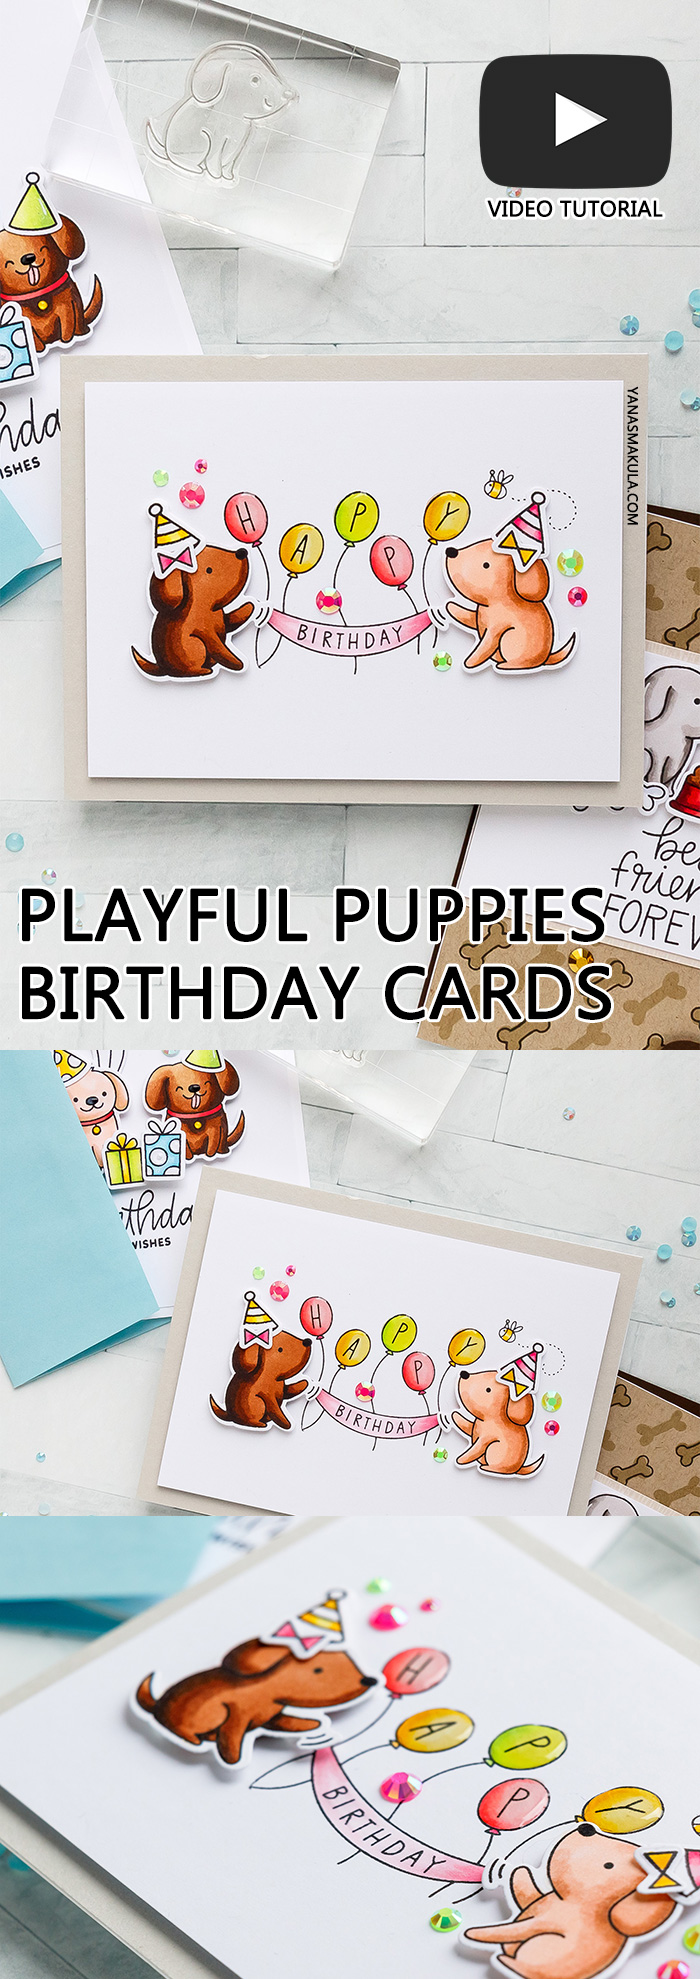 Pretty Pink Posh | Clean & Simple Cards with Puppies! Video tutorial by Yana Smakula. Playful Puppies Stamp Set #prettypinkposh #stamping #cardmaking